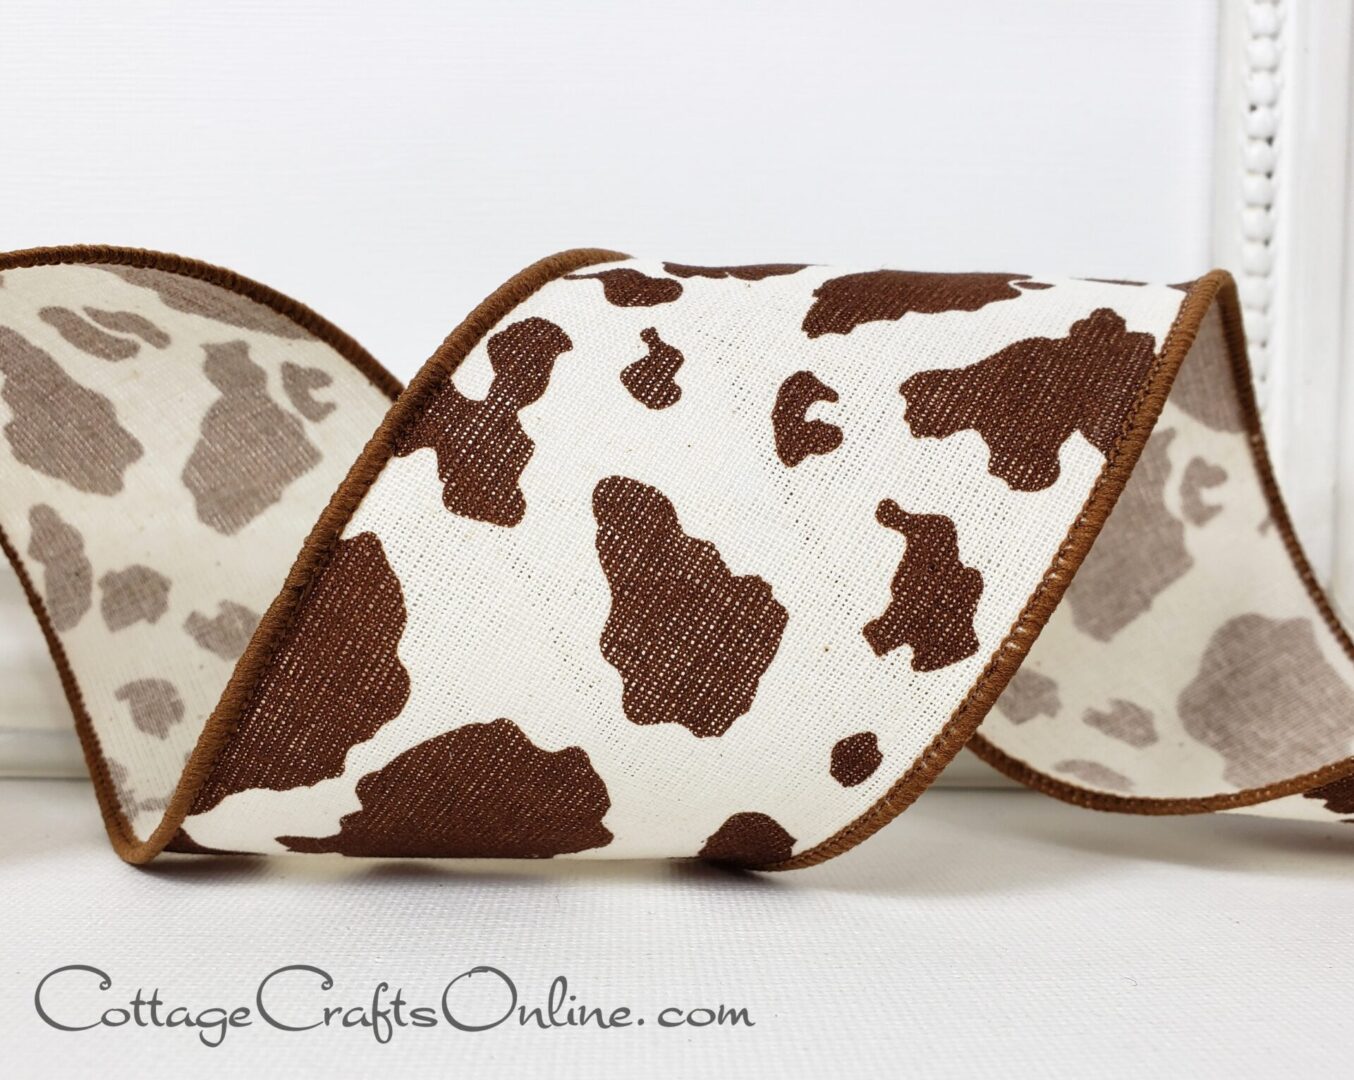 Mocha brown cowhide print on ivory 2.5" wide wired ribbon from the Etsy shop of Cottage Crafts Online.